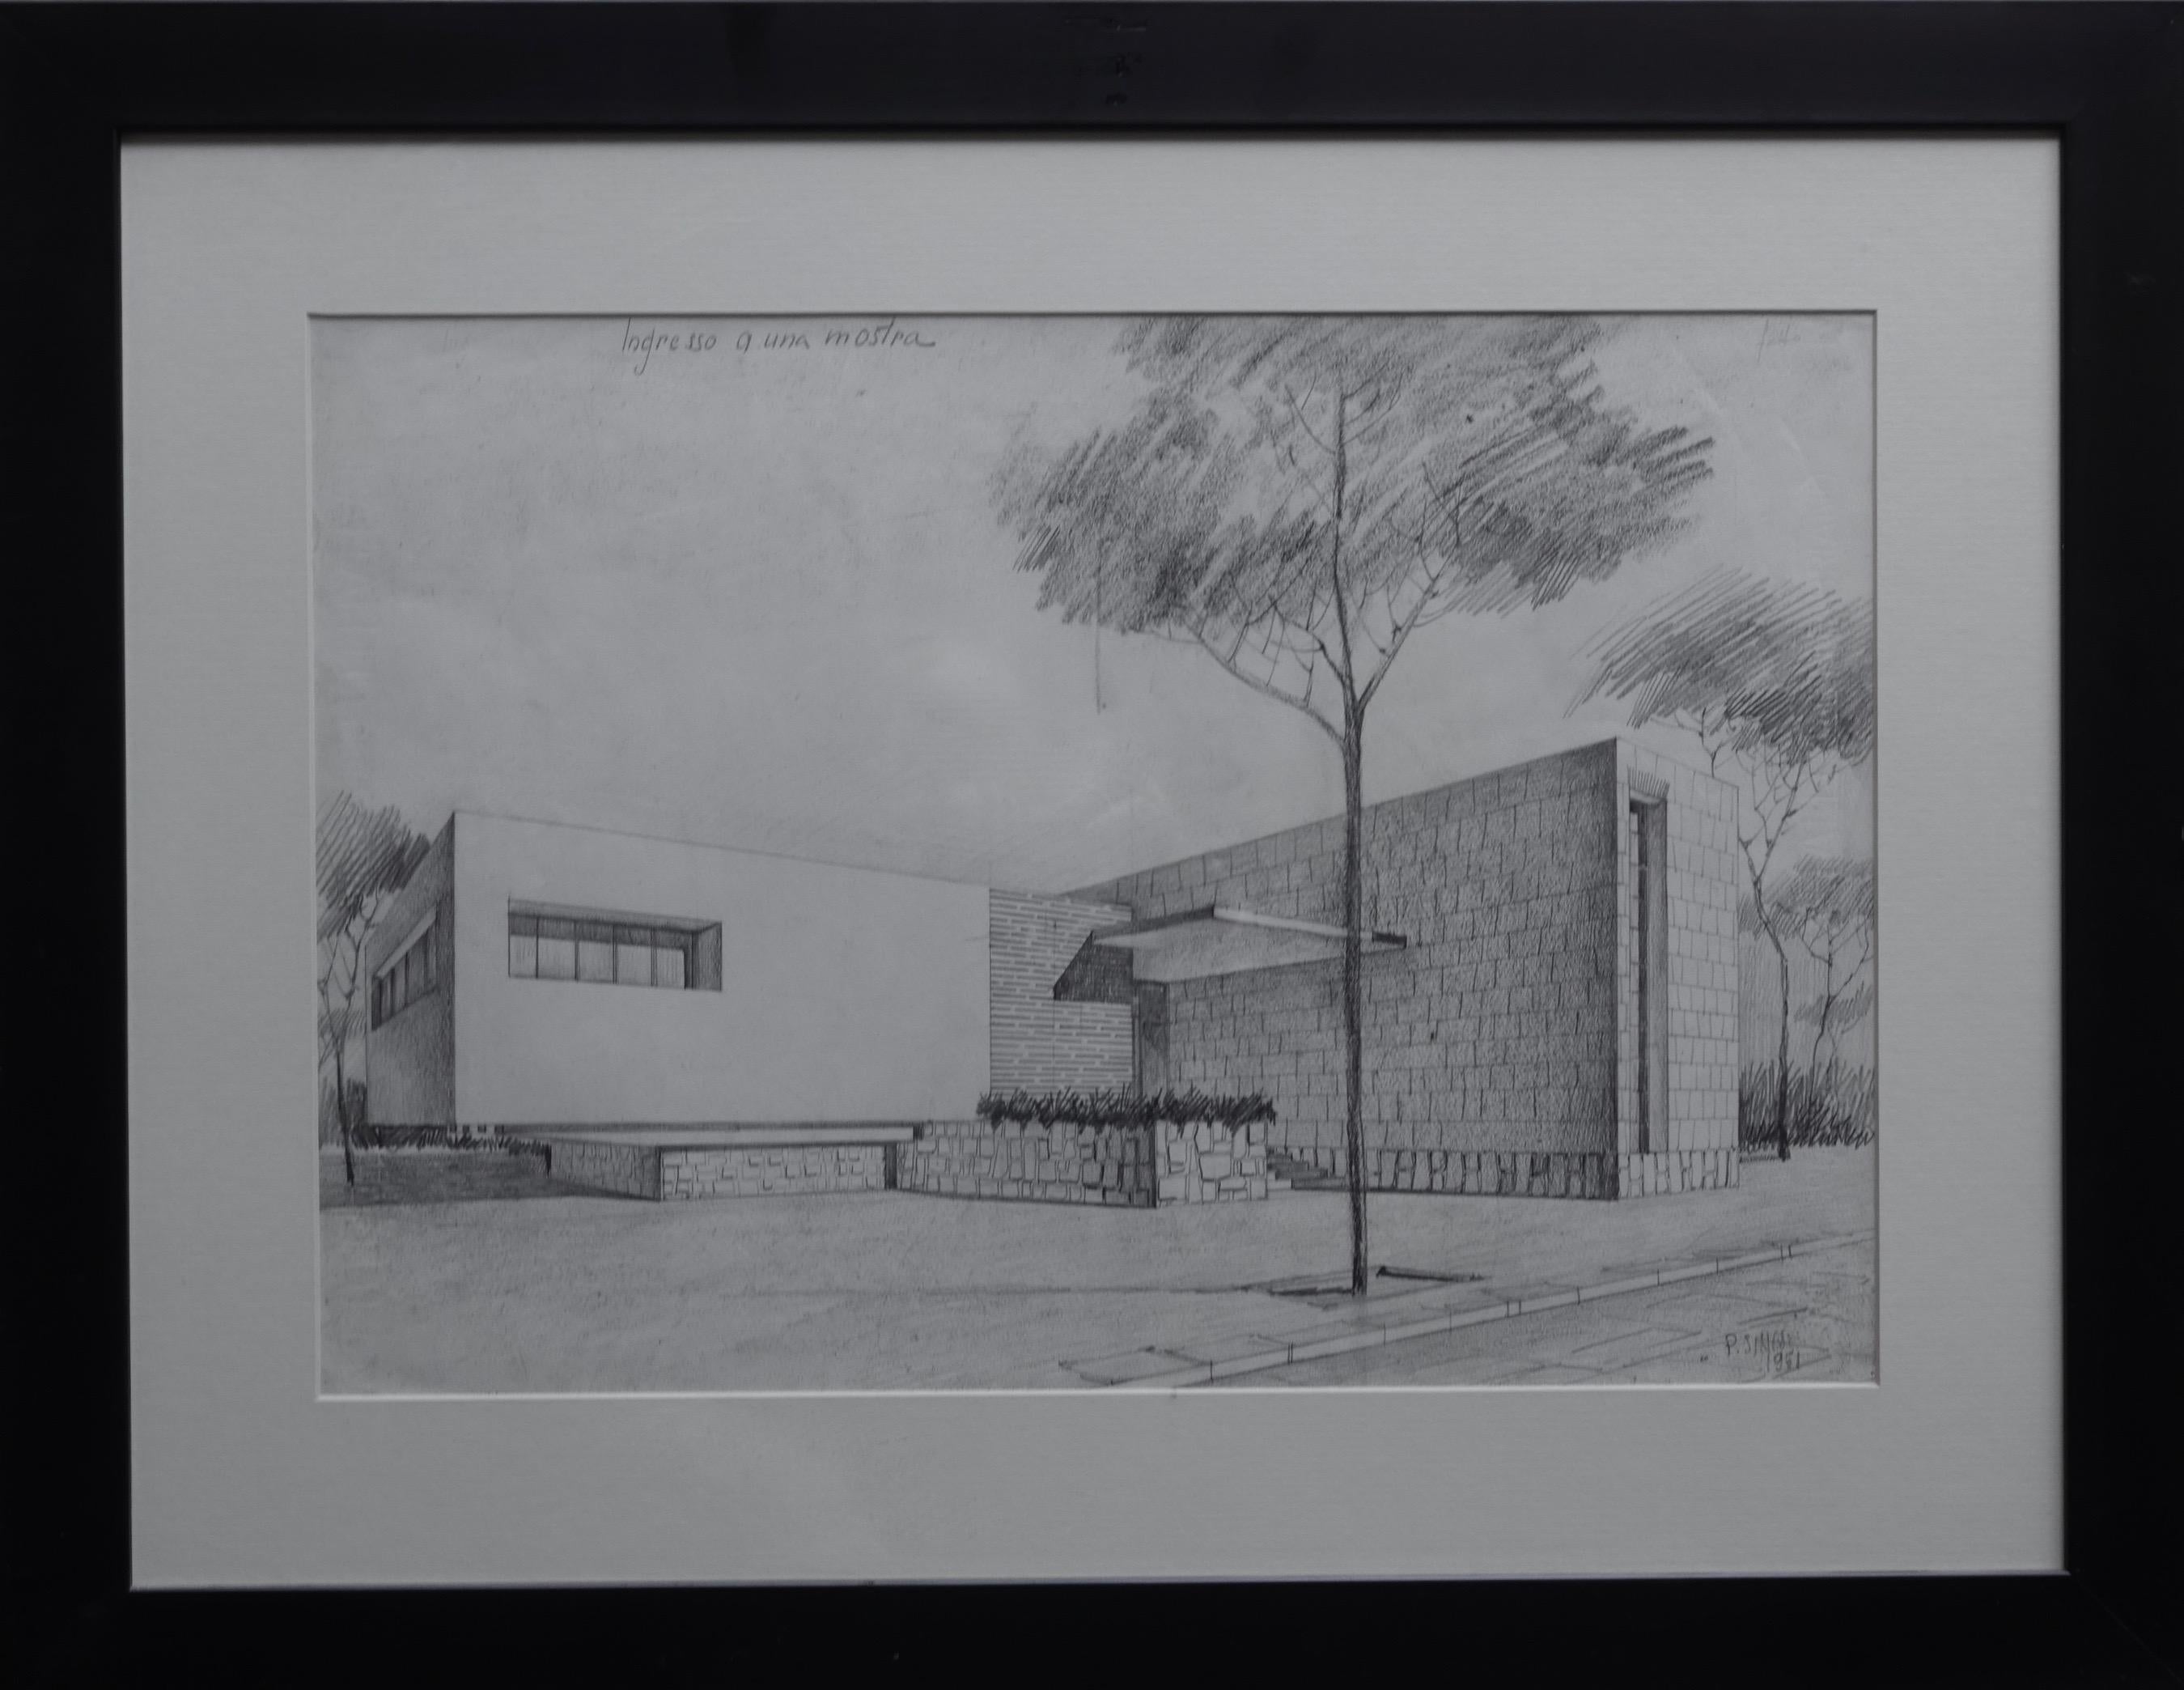 Series of Six Architectural Drawings
Italy, '40 - '50 
Signed and dated 